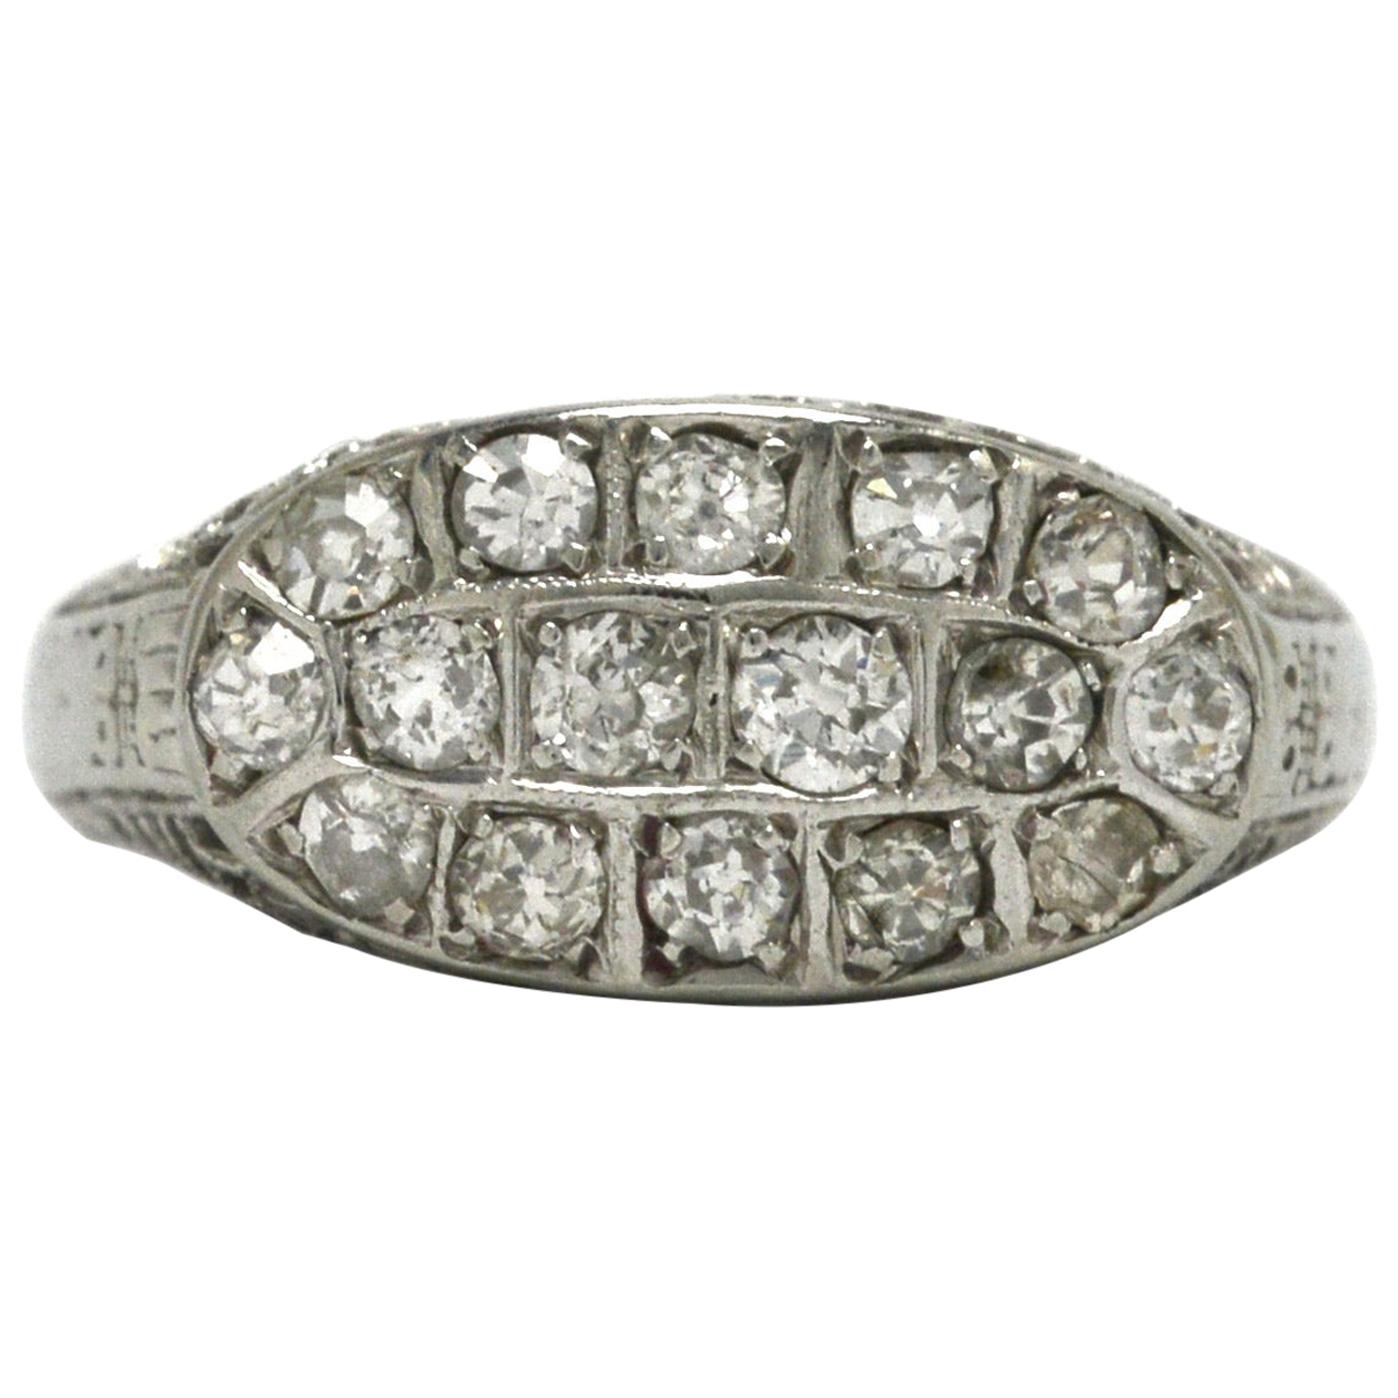 Antique Filigree Diamond Engagement Ring Art Deco Vintage Oval Cluster Band Lacy